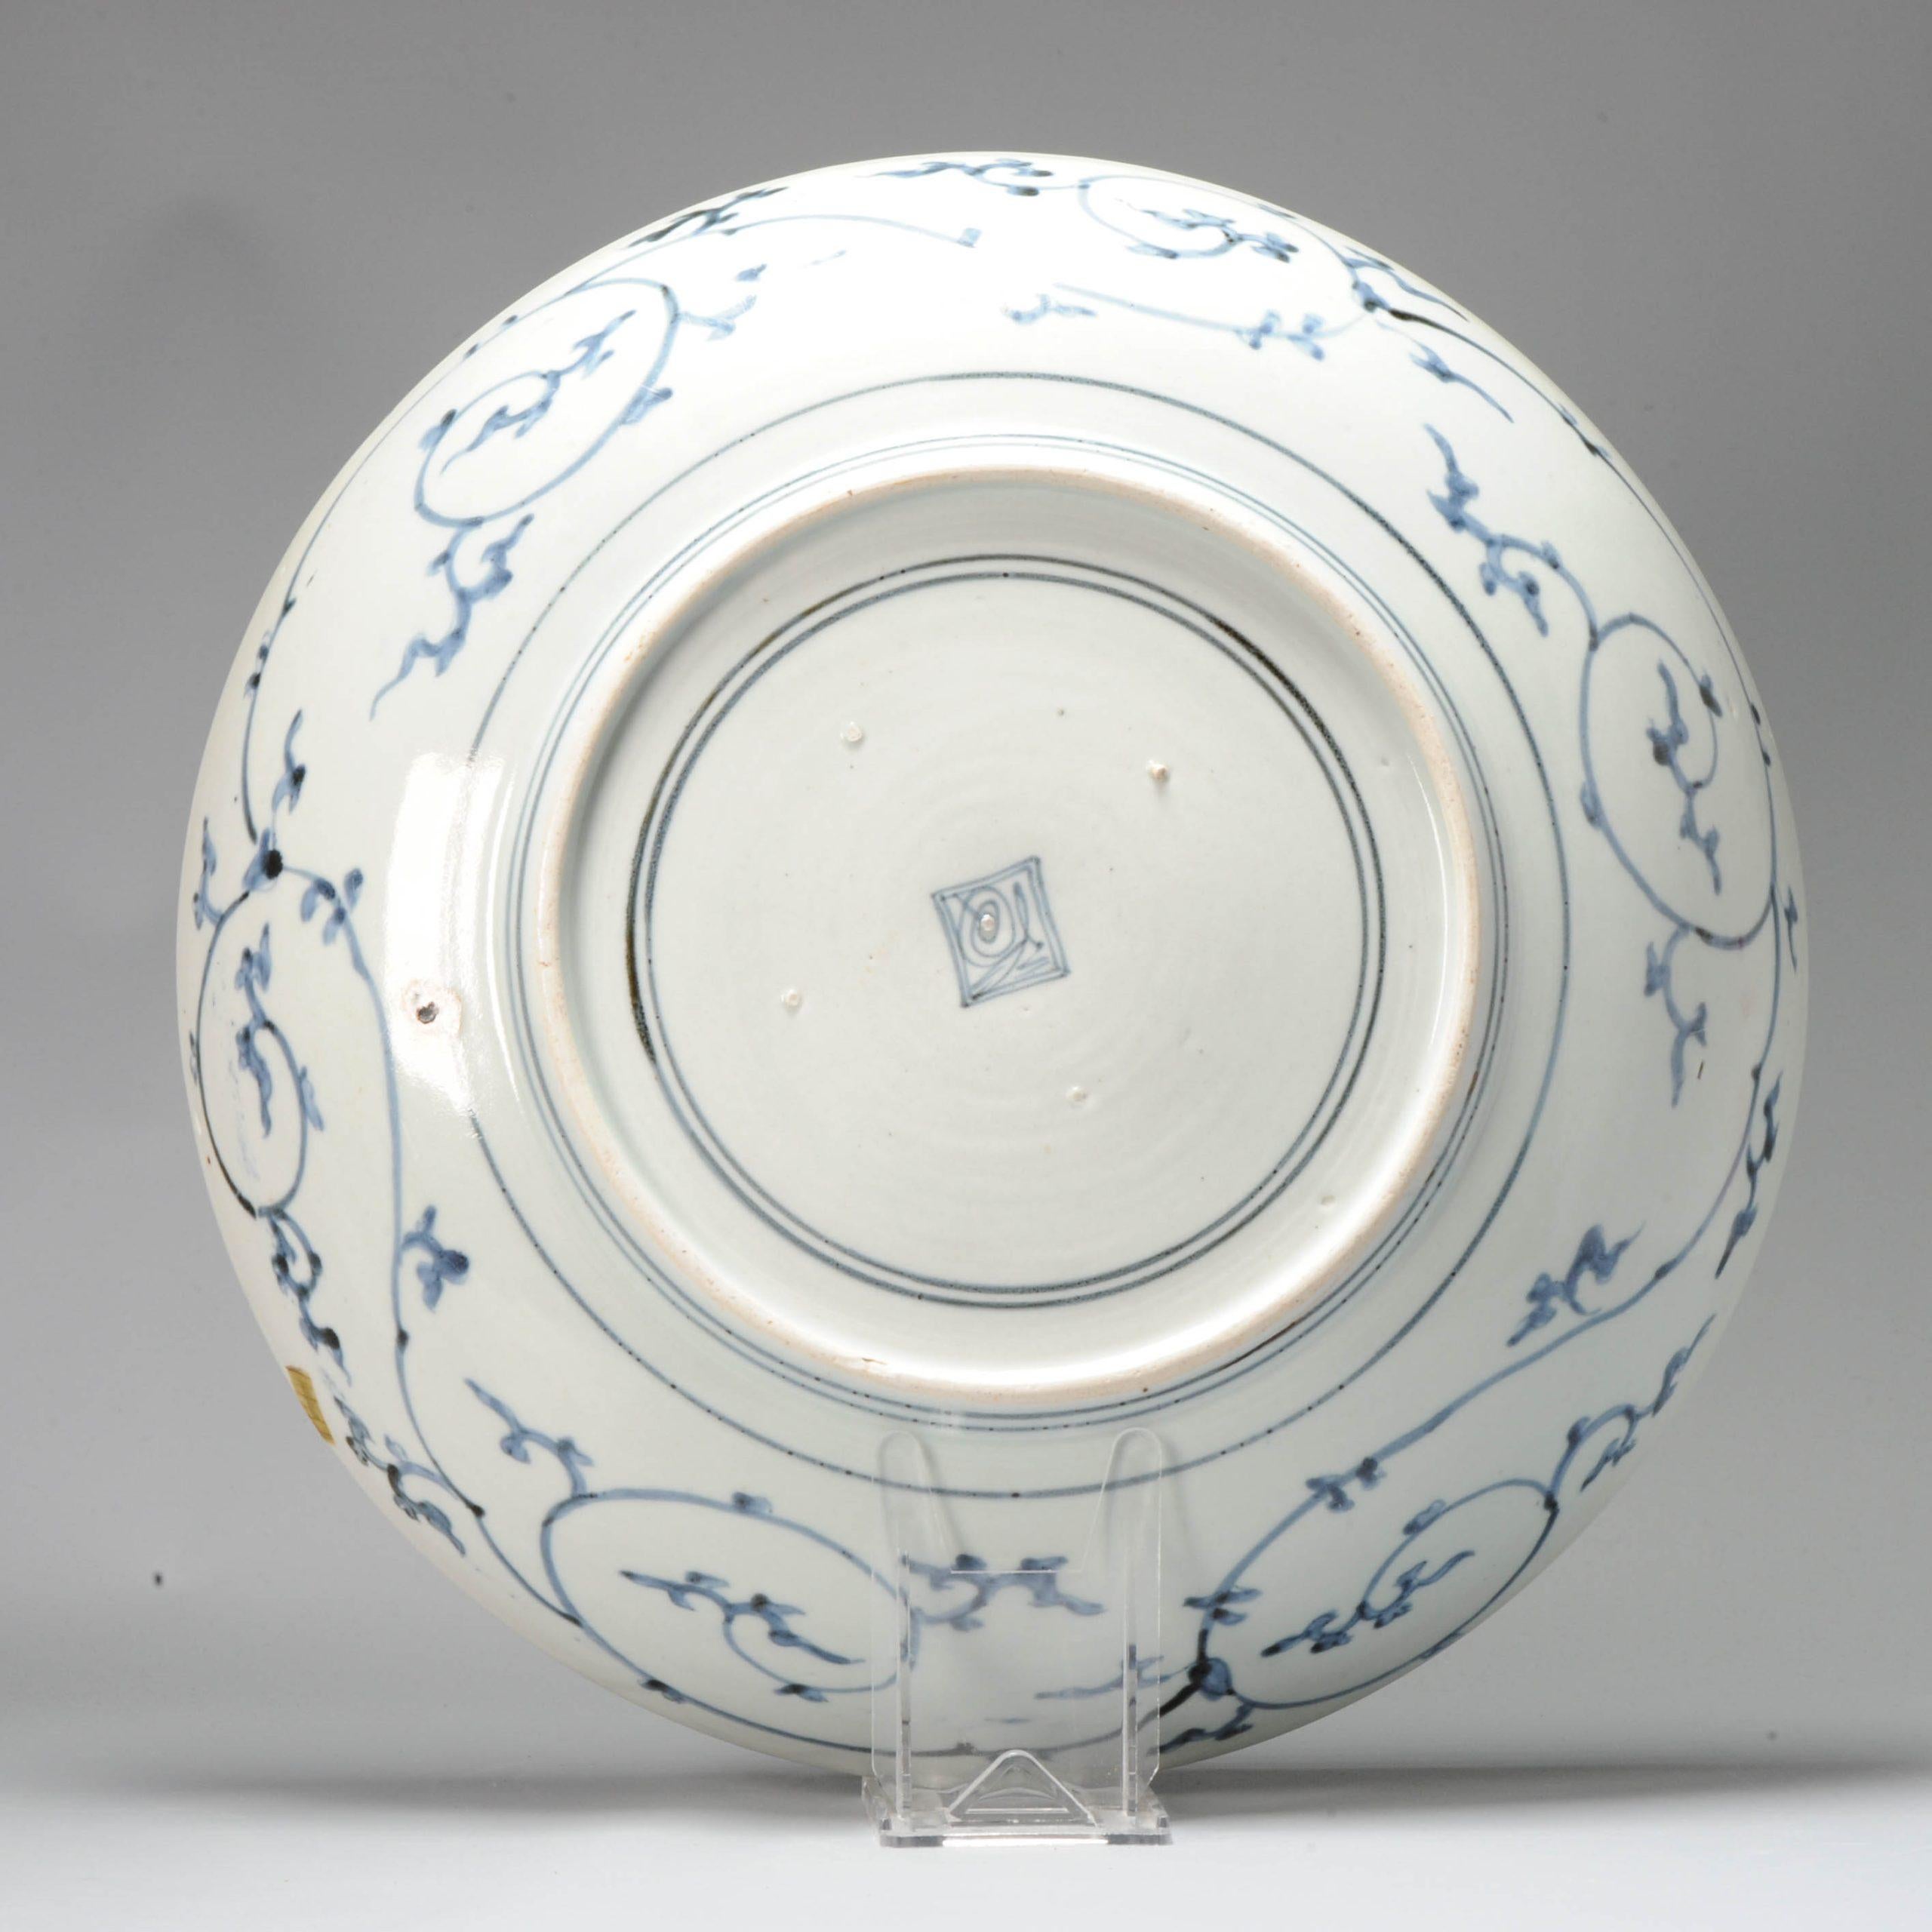 Edo Period Japanese Porcelain Dish Charger Arita Fuku Mark, 17/18th Century In Good Condition For Sale In Amsterdam, Noord Holland